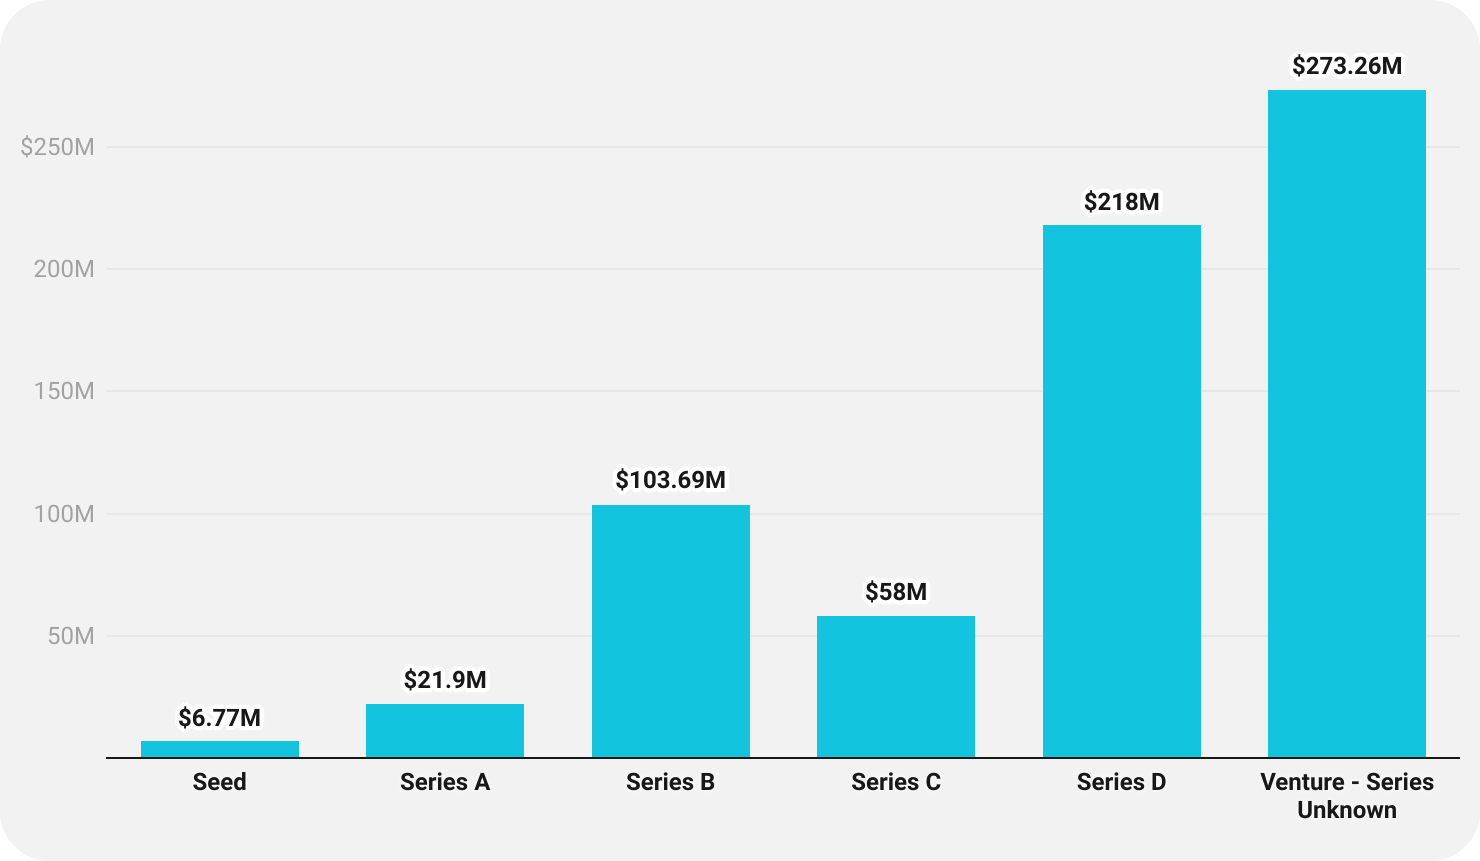 A breakdown of medical device company funding round types, from Seed to Series D, that were recorded in August in the US